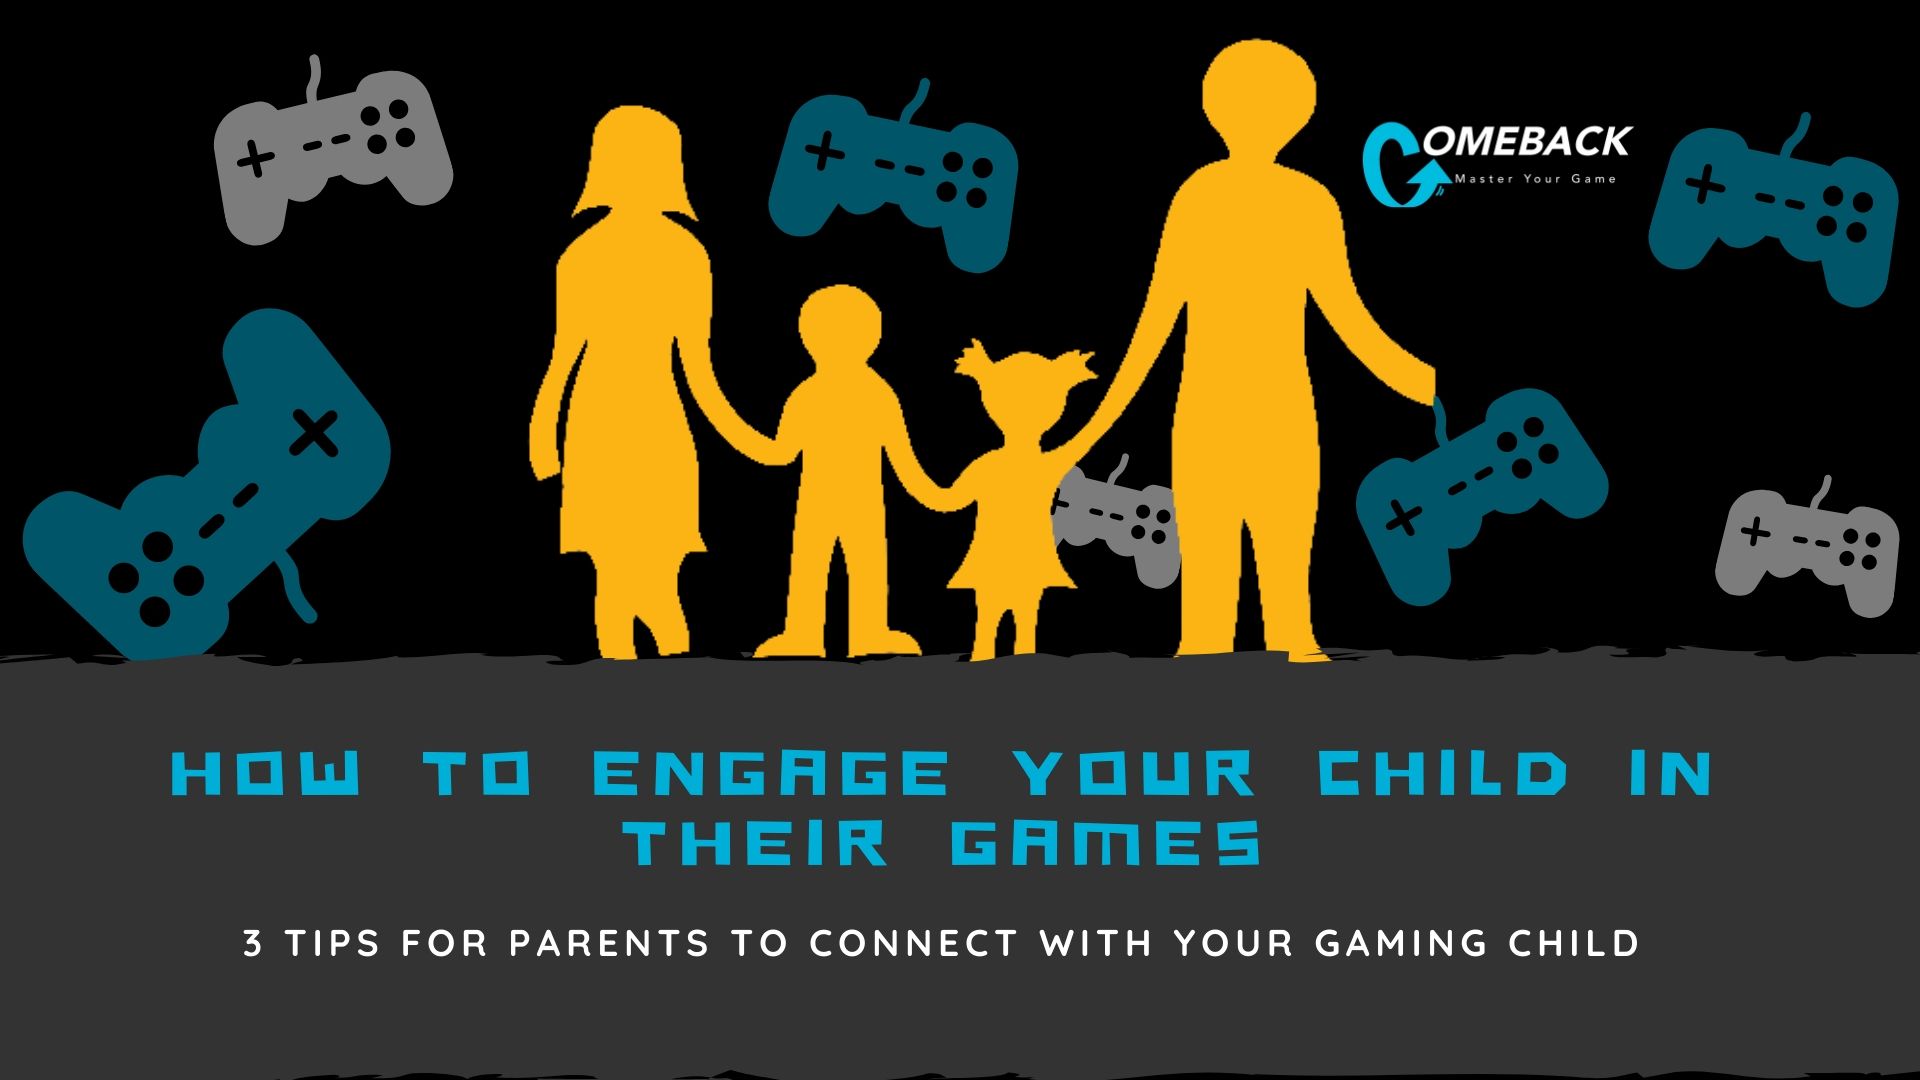 How to Engage your Child in Their Games